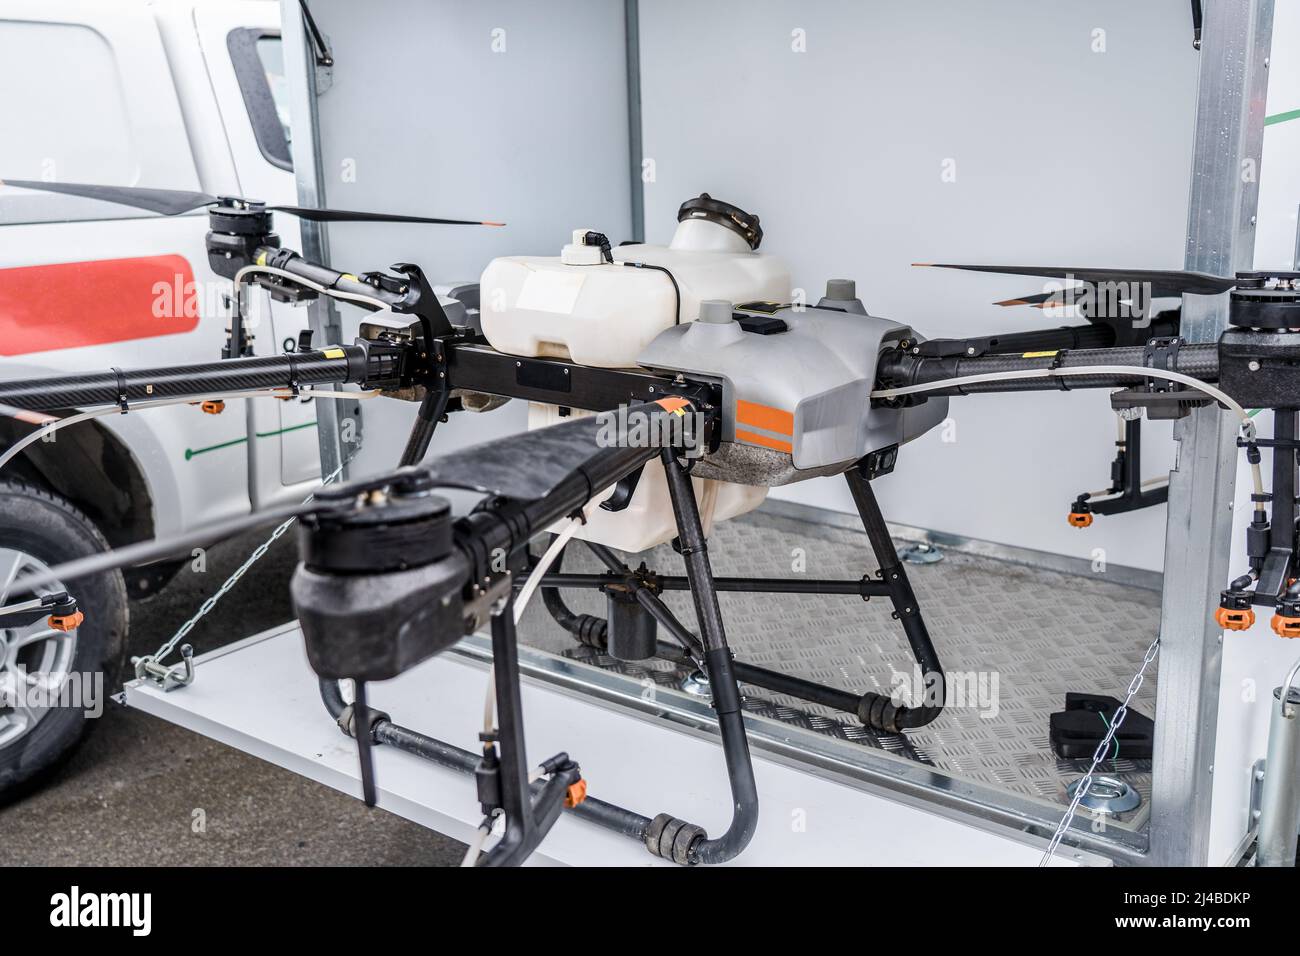 Special agriculture drone or quadcopter aircraft for working on sown fields, spraying and watering. Stock Photo